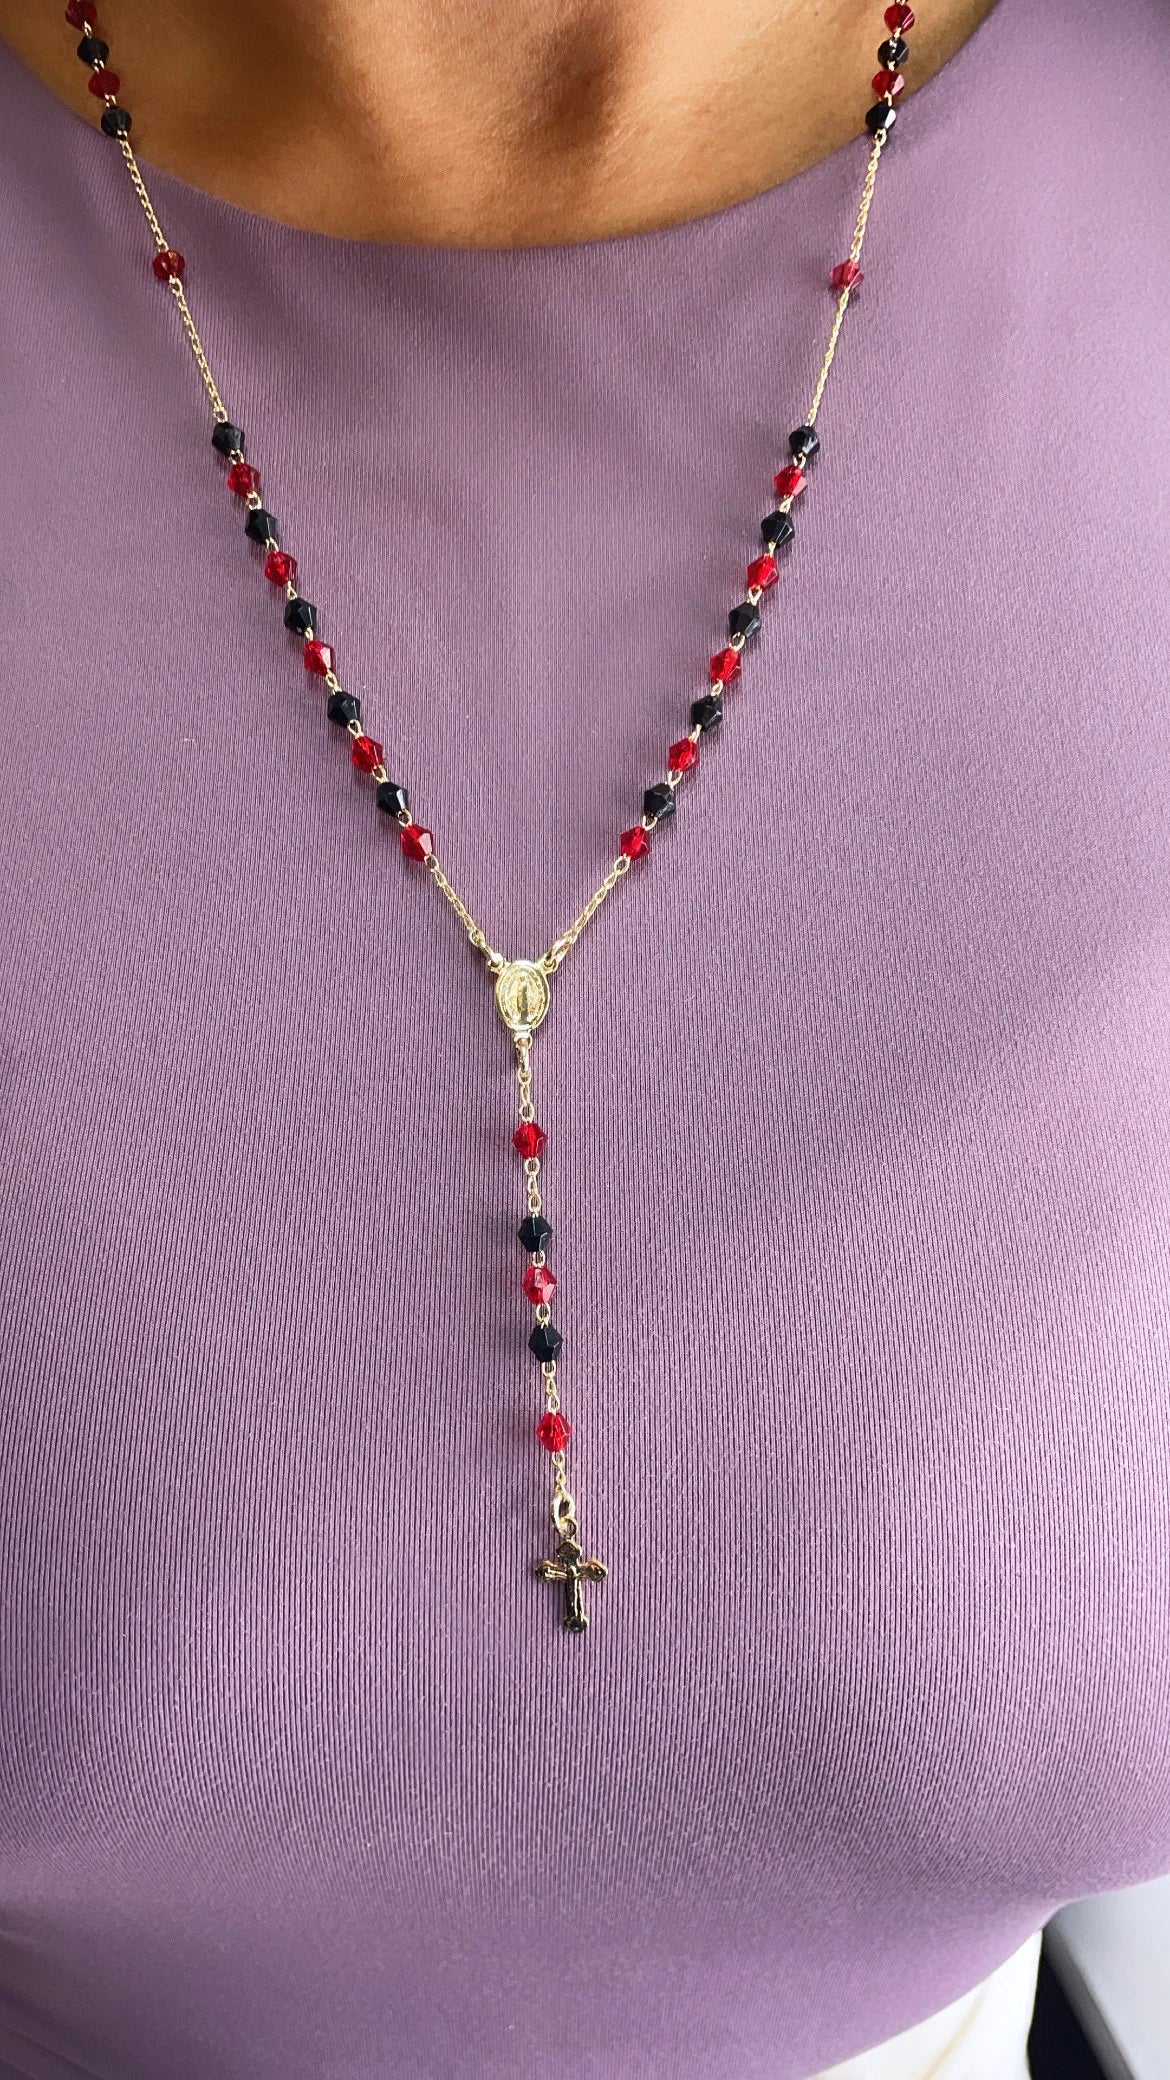 18k Gold Filled 20” long Black and Red Beaded Rosary Style Necklace